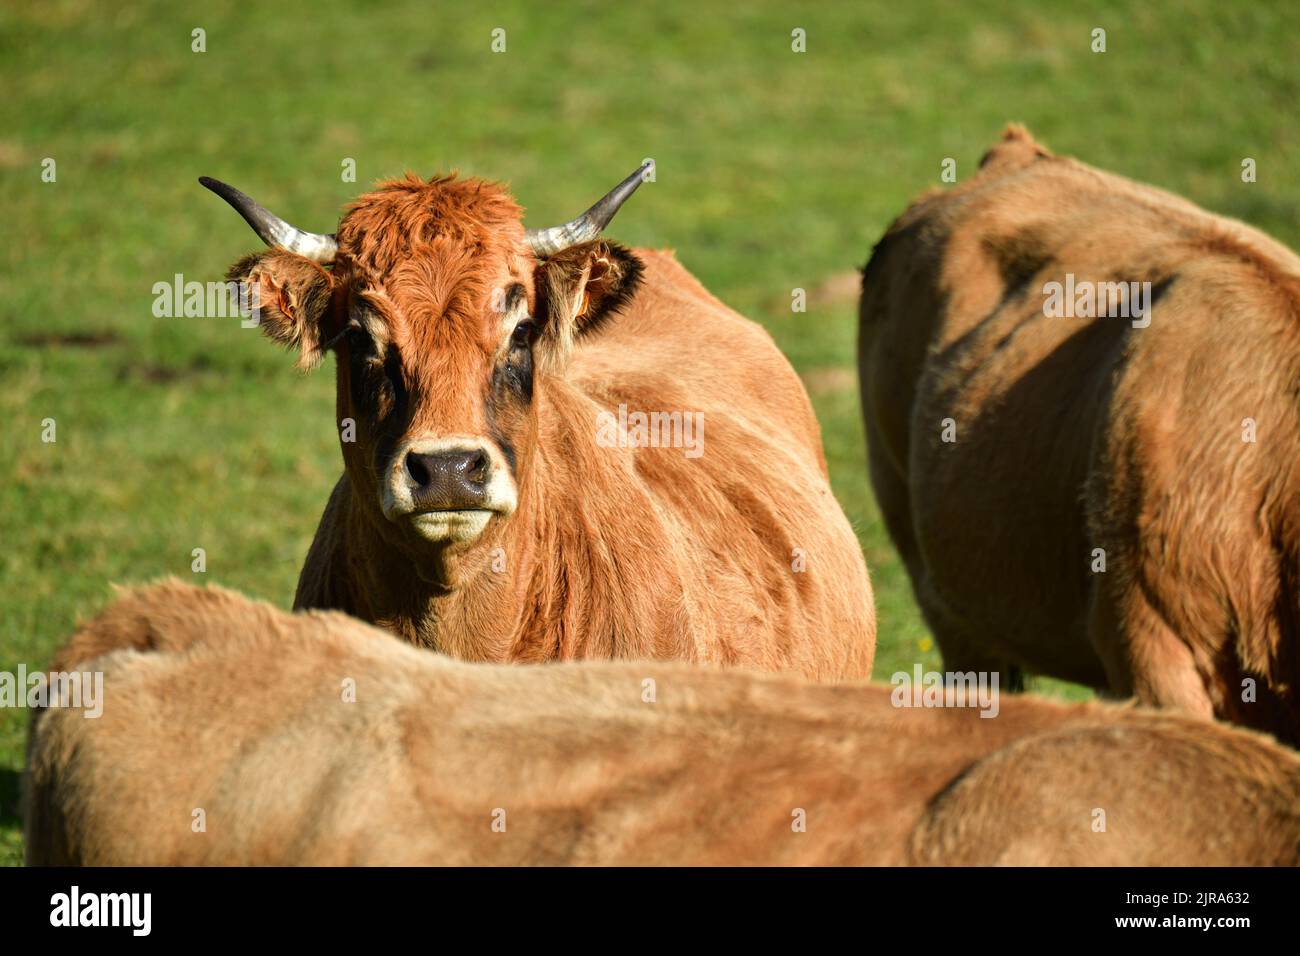 Haute-Loire department (south-central France): Aubrac cows, cattle. Front view of a cow among others Stock Photo